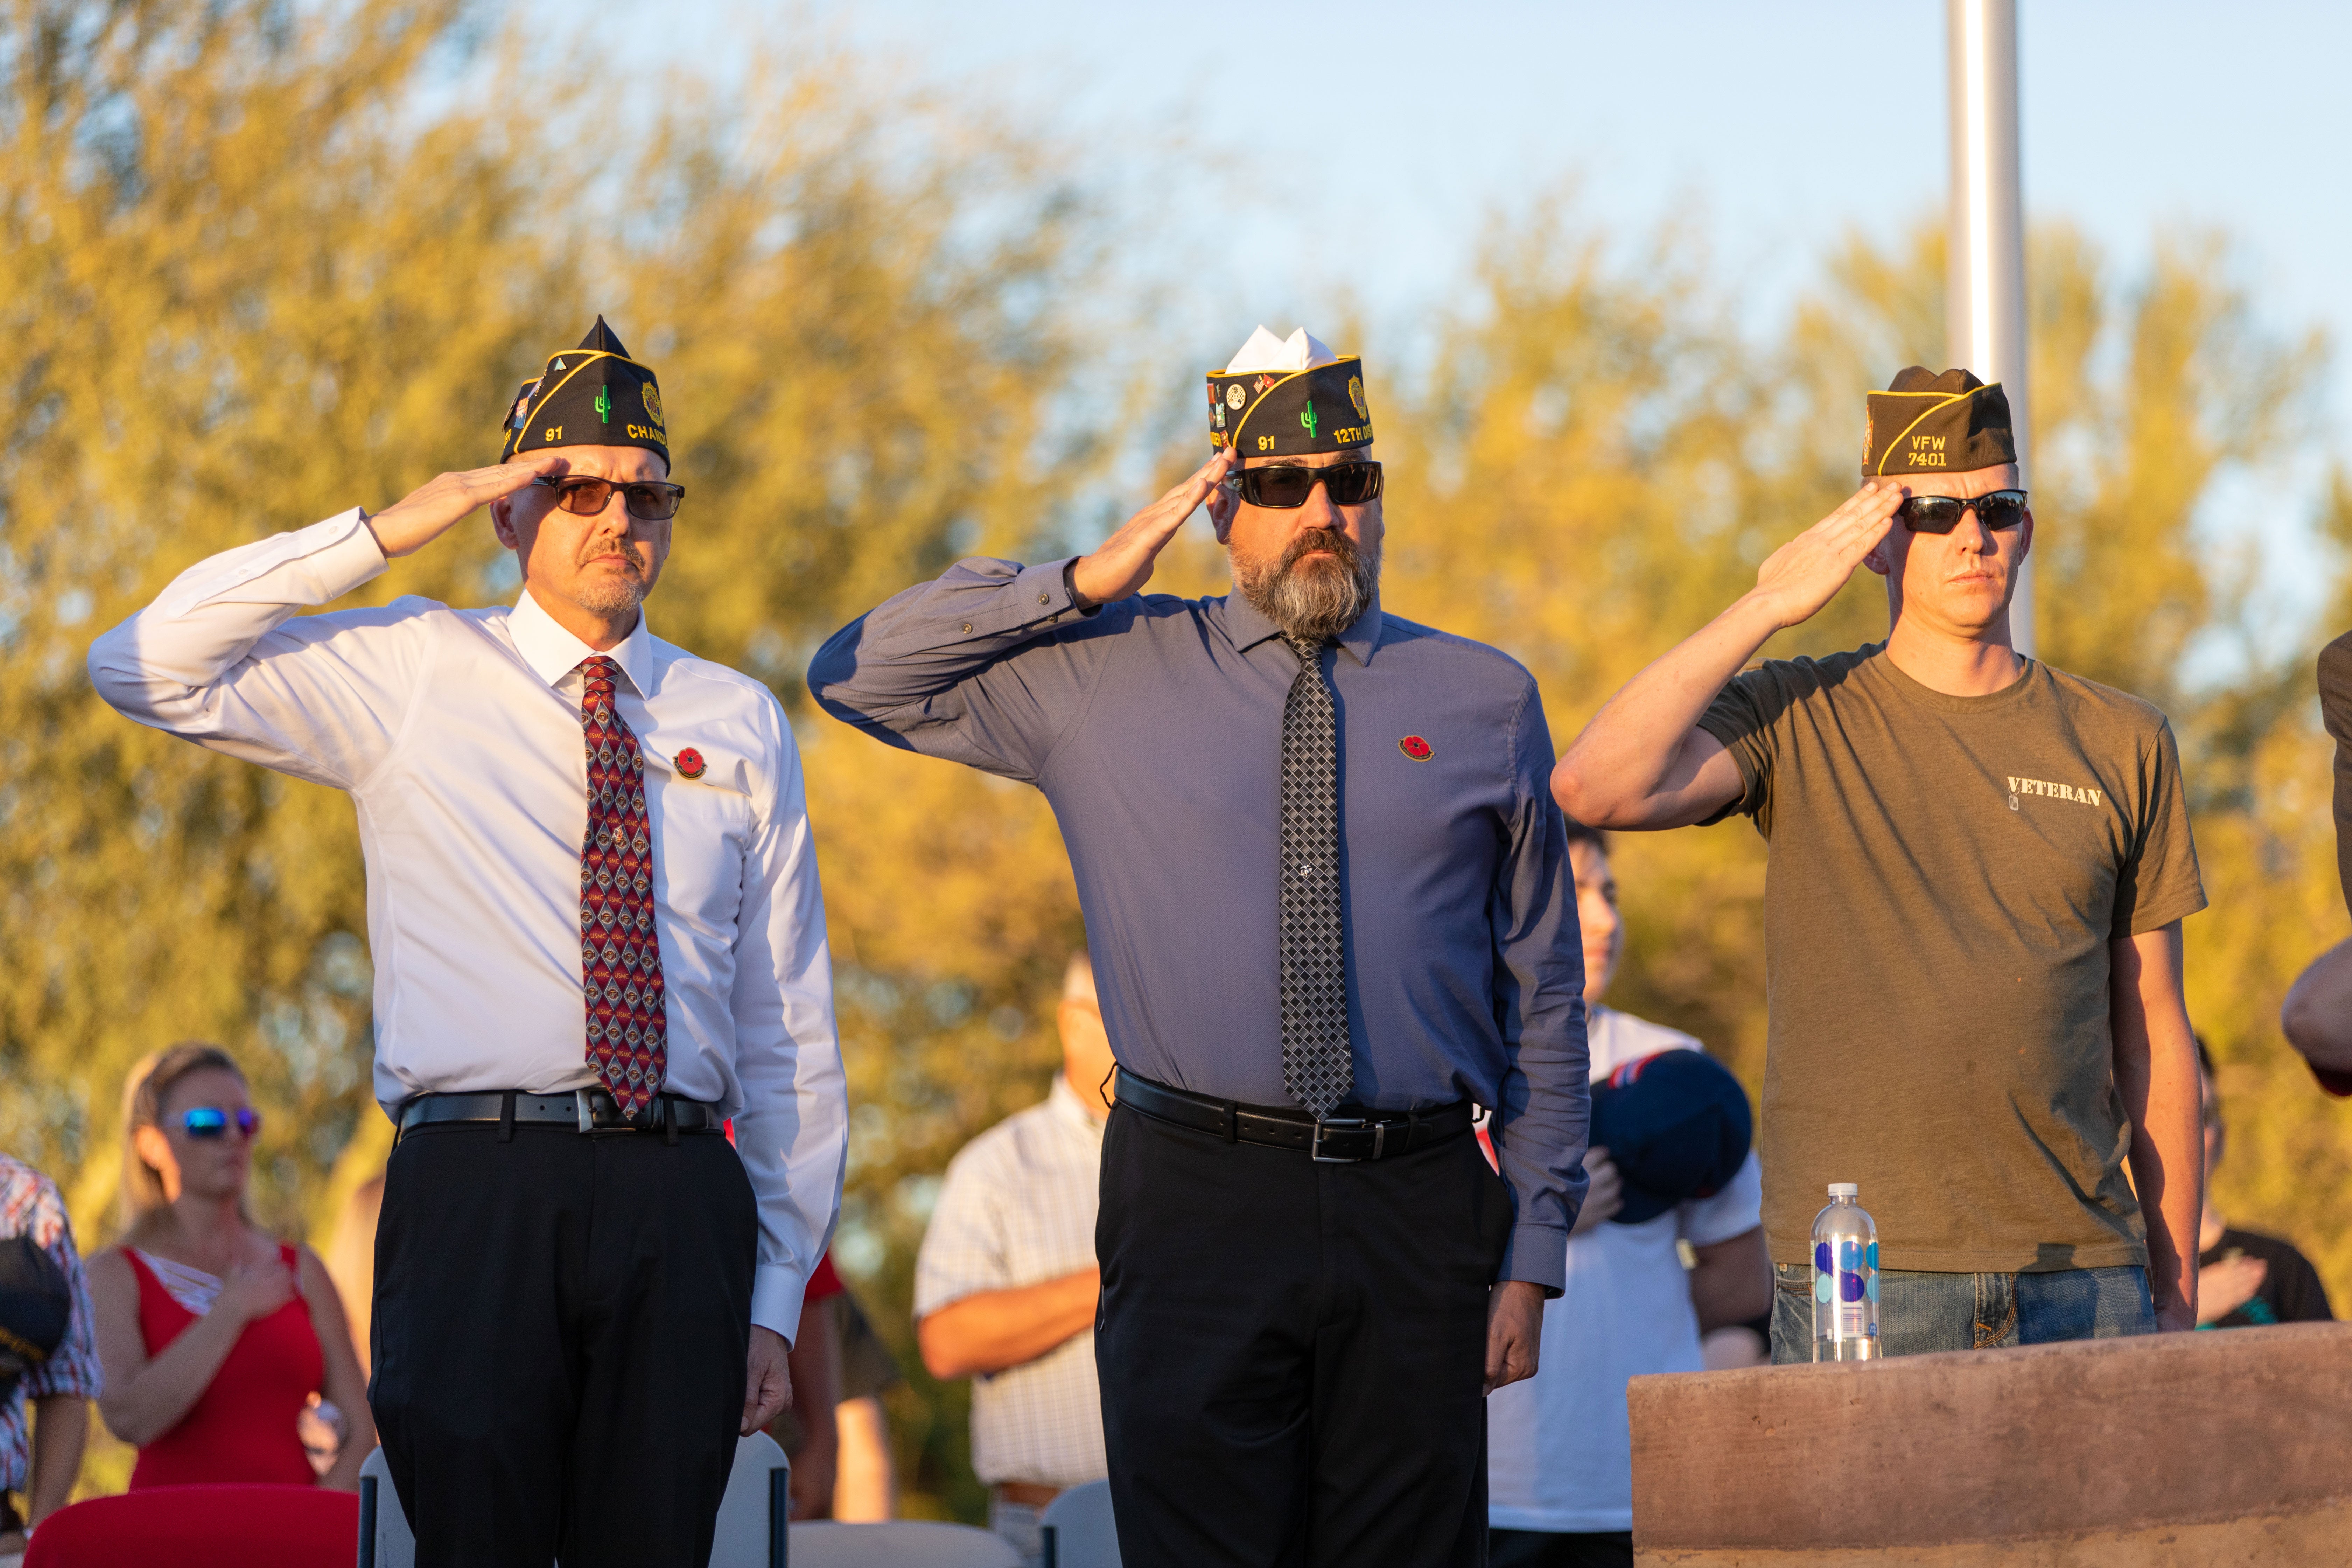 Veterans Salute at the Field of Honor